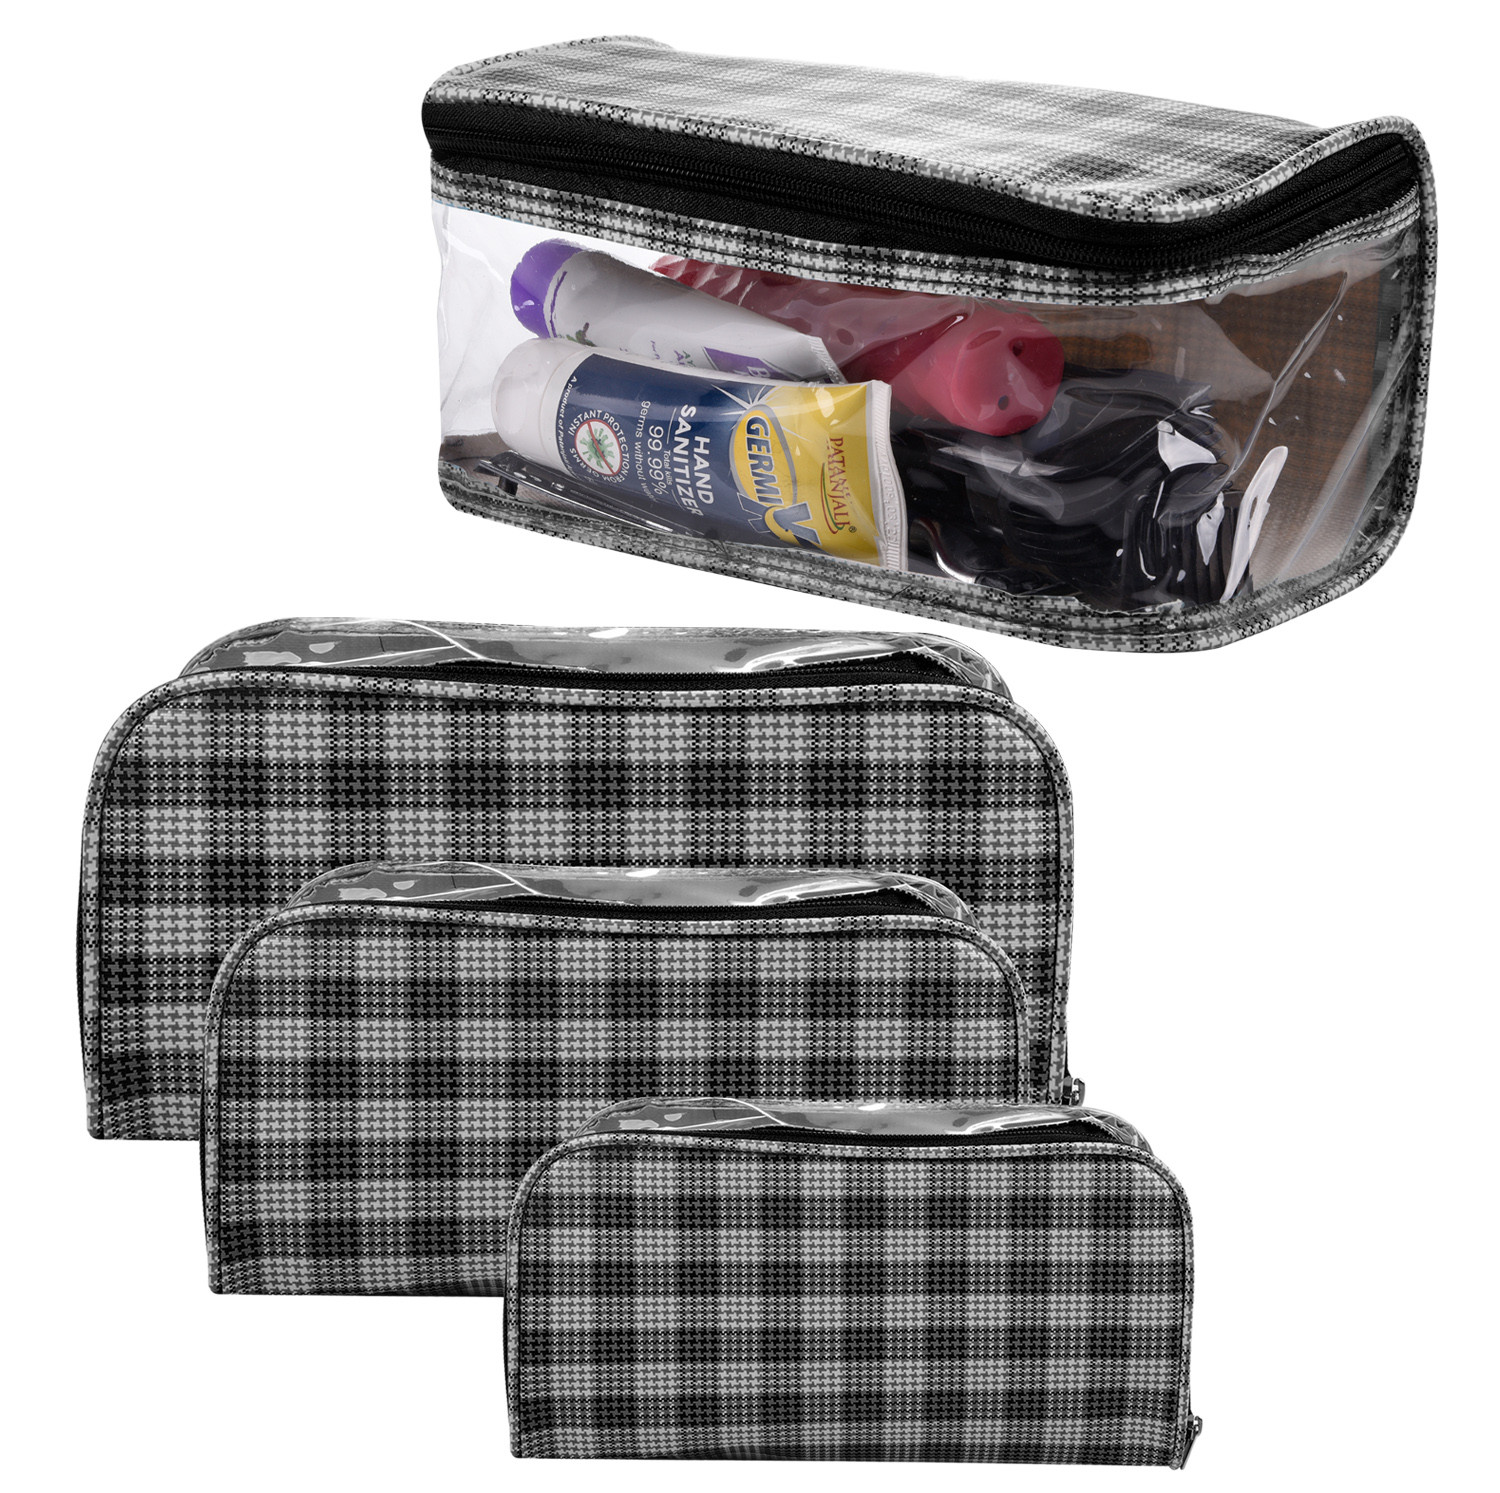 Kuber Industries Toiletry Organizer|4 Piece Vanity & Cosmetic Pouch Set|PVC Check Print Transparent Travel Organizer with Handle for Men & Women (Gray)